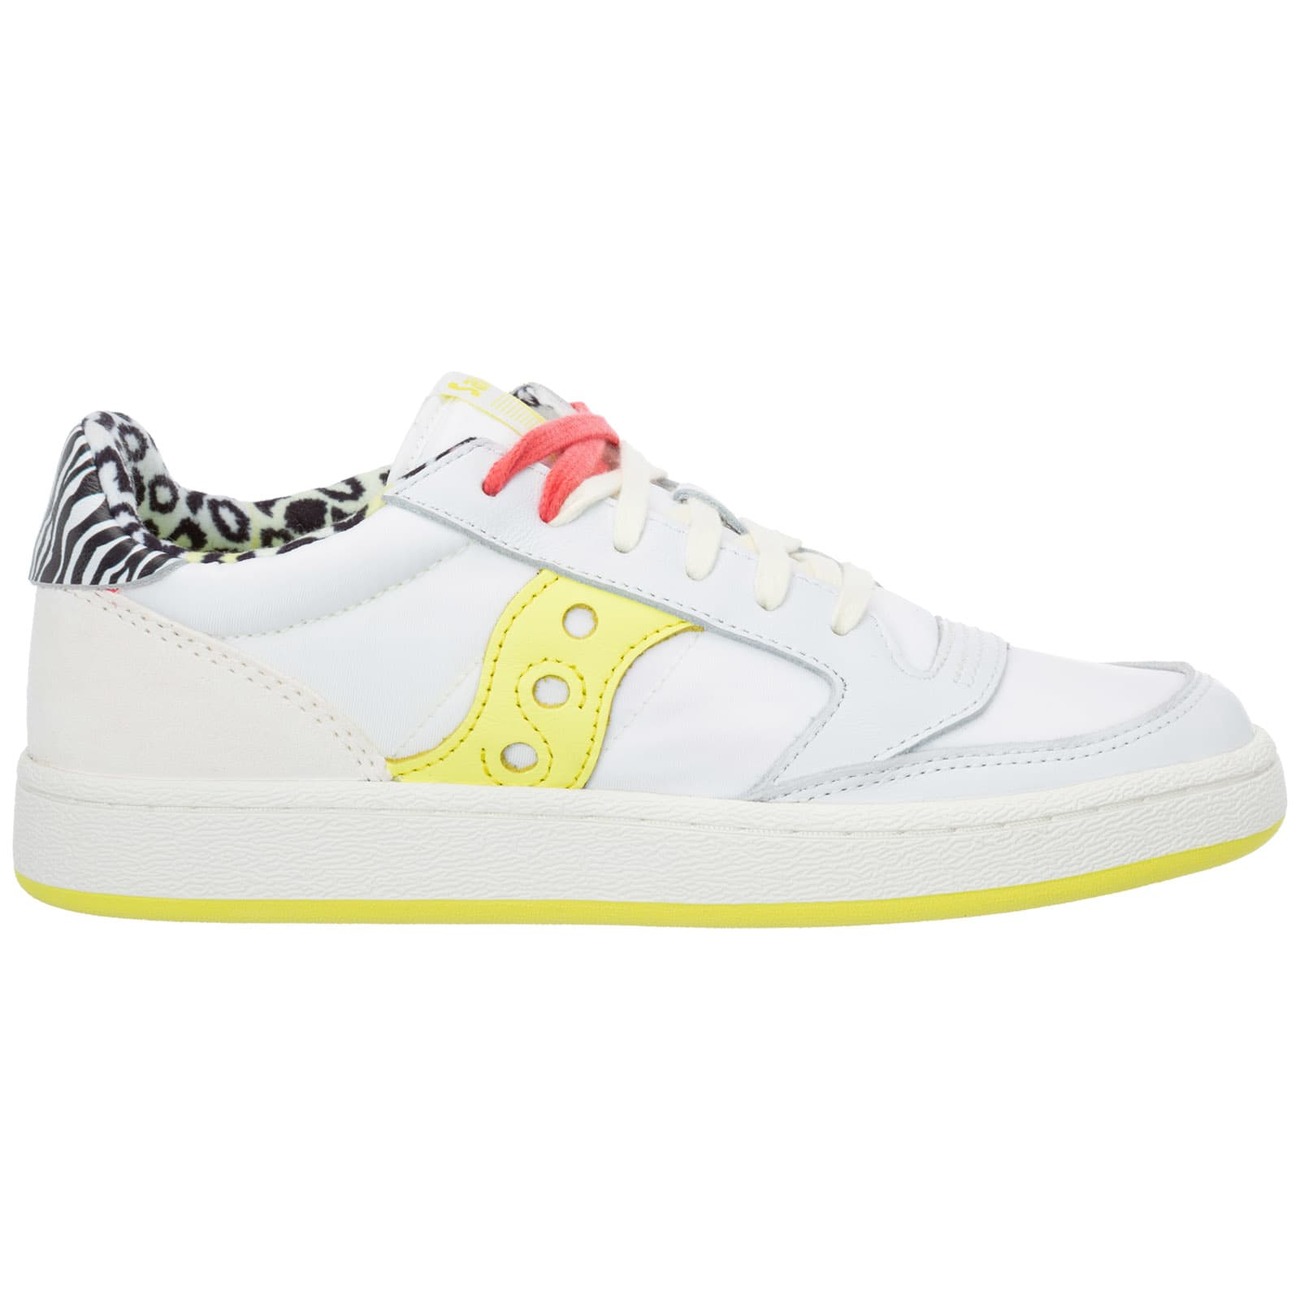 Saucony Jazz Court Sneakers in white / yellow